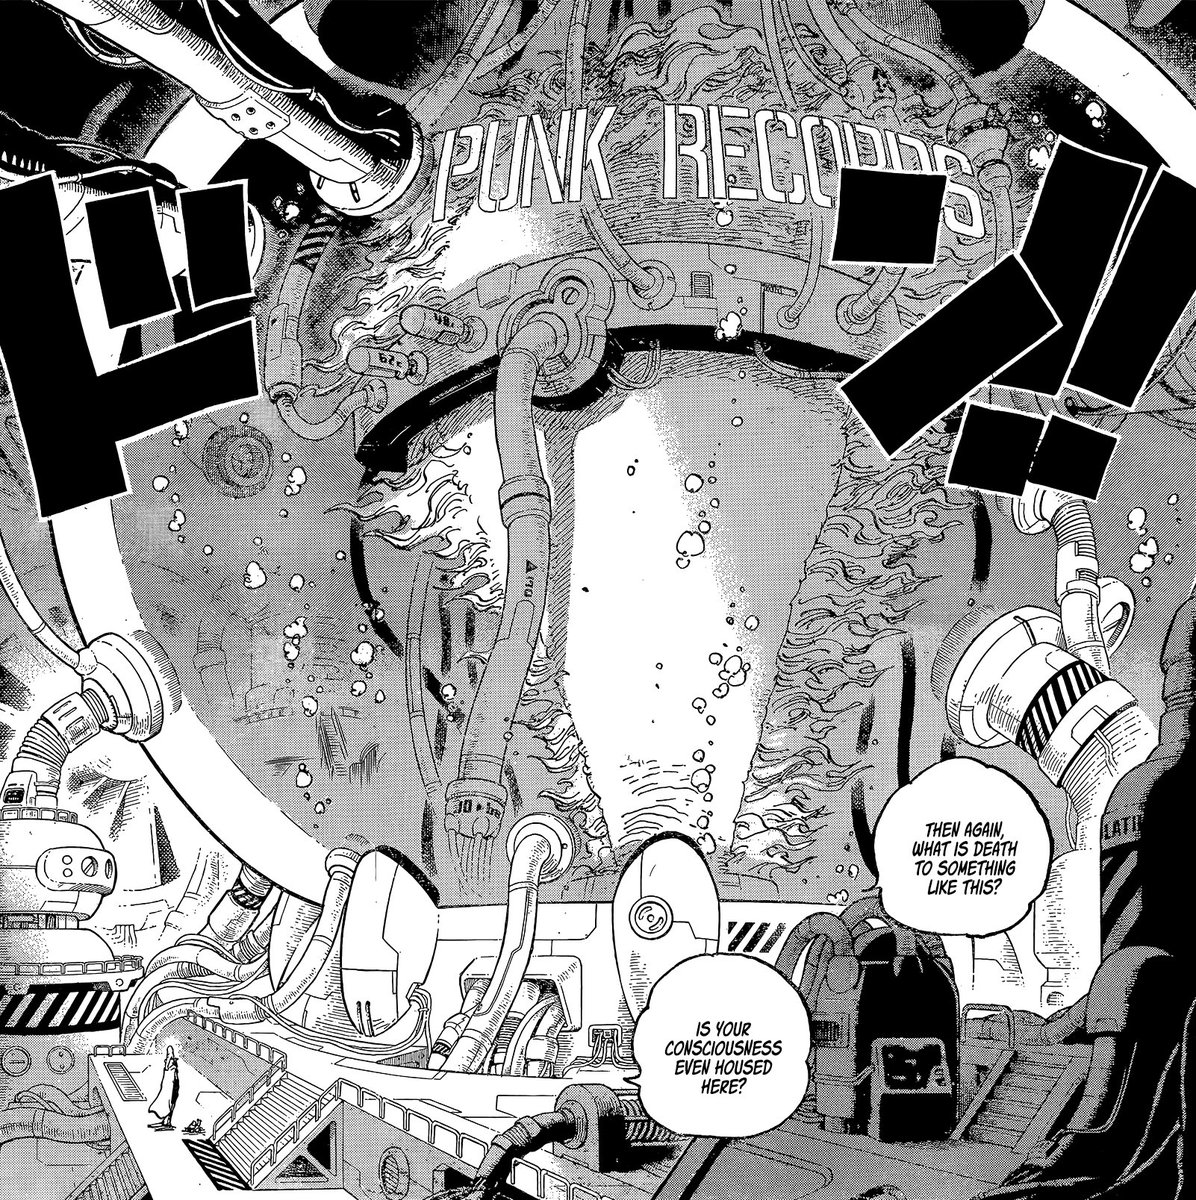 #ONEPIECE1113 

So that’s where he put the rest of his head?? Idk why I never questioned what happened to the part he cut off damn 💀 

But my god look at the art and scale of this spread it’s so good